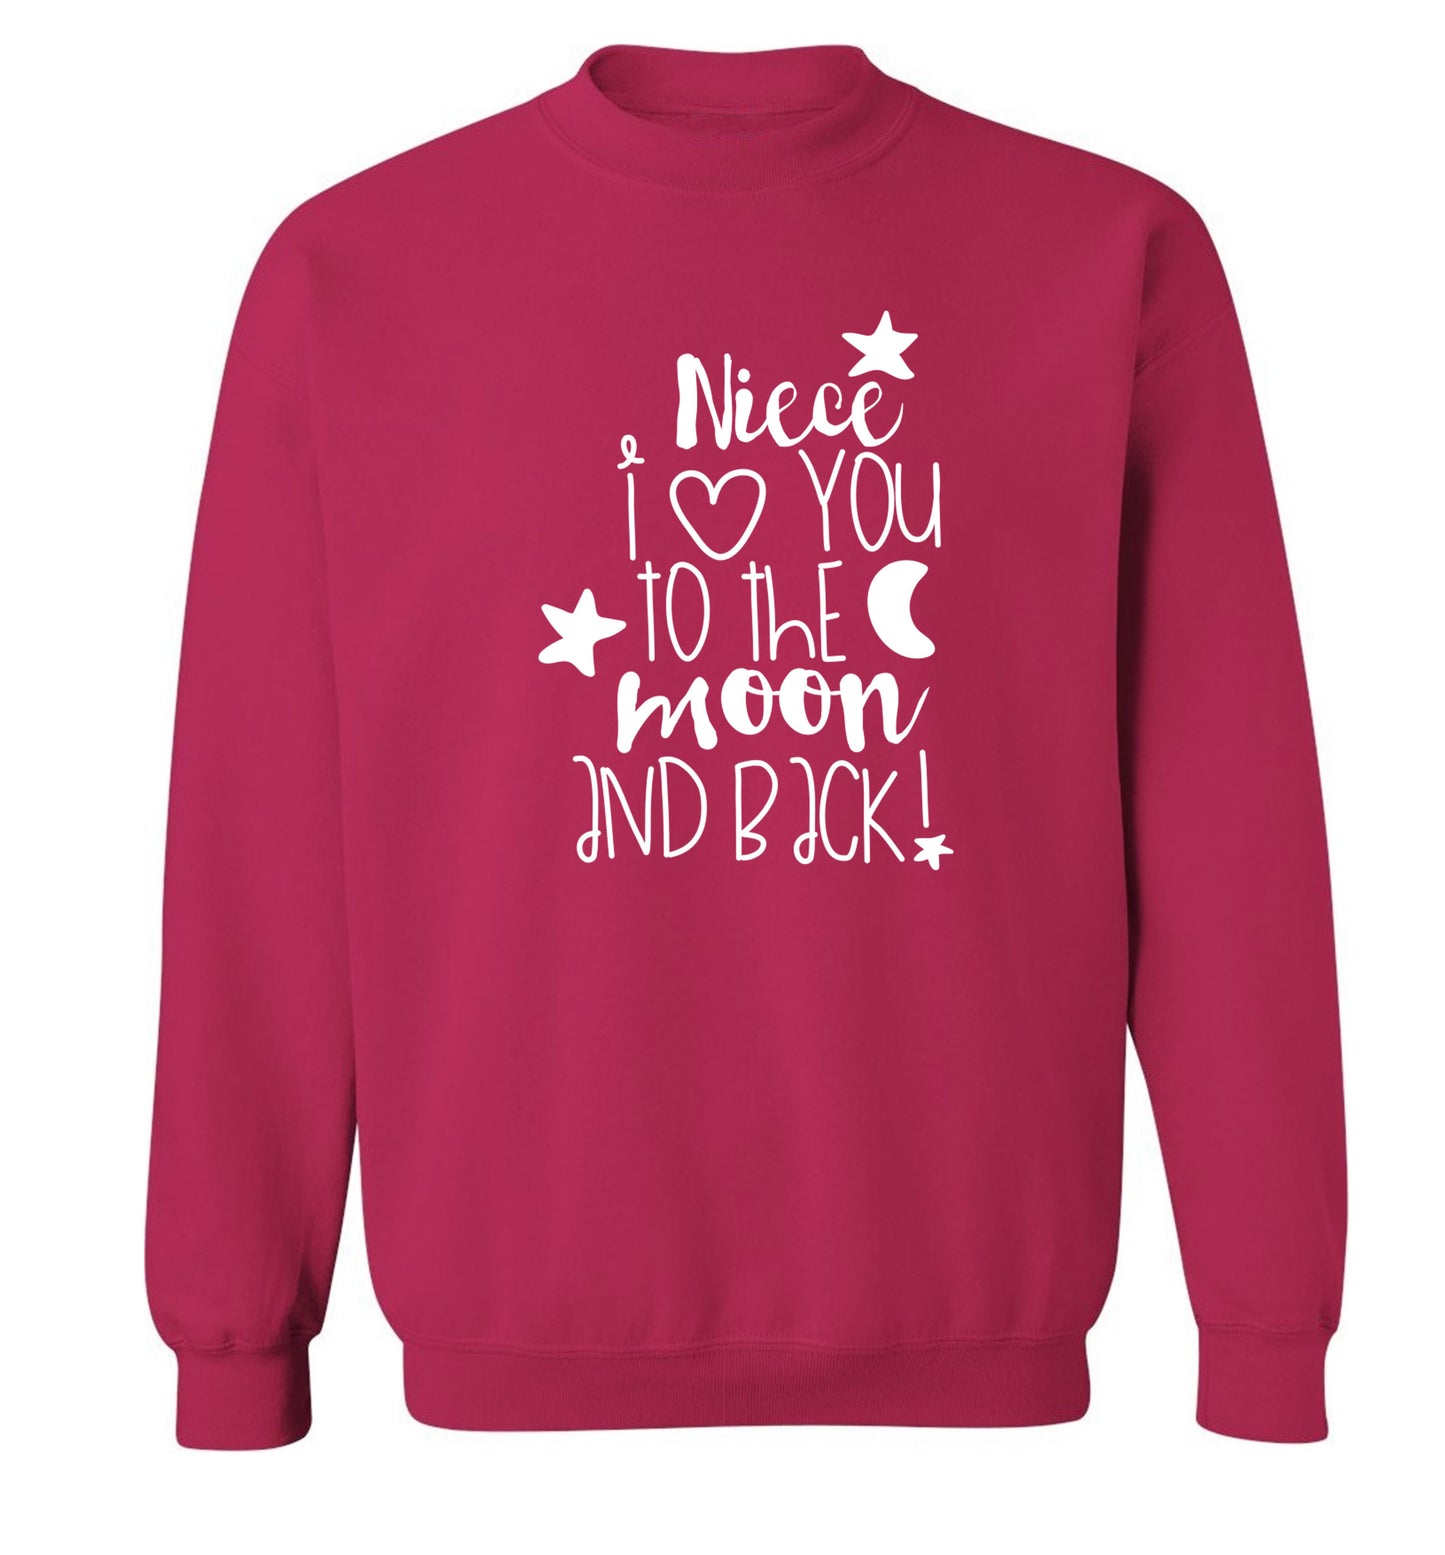 Niece I love you to the moon and back Adult's unisex pink  sweater XL